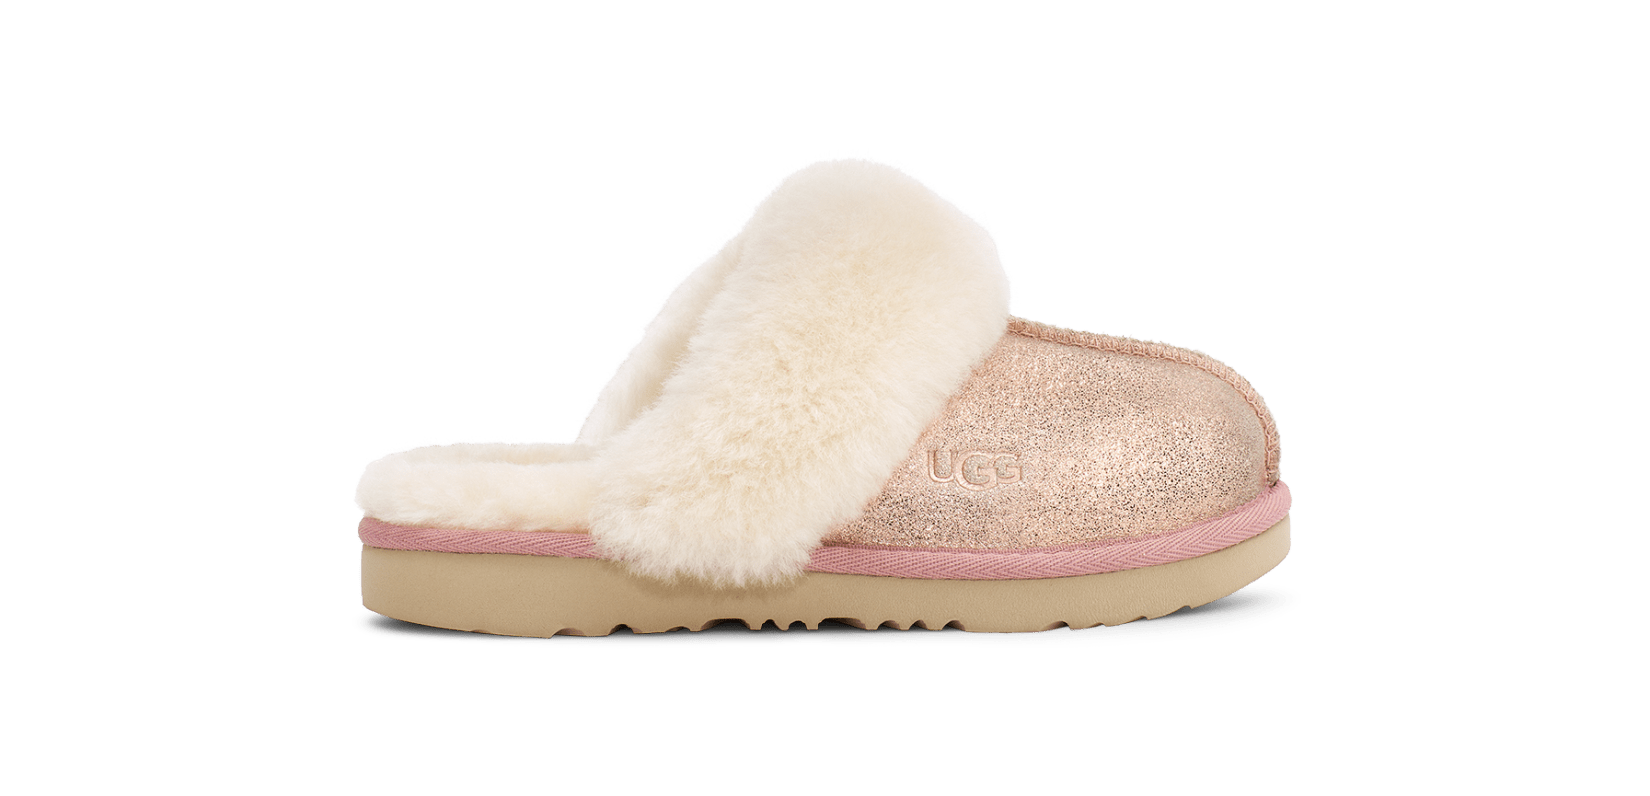 These Lands' End Fuzzy Fur Slippers Are a Total UGG Dupe | Apartment Therapy